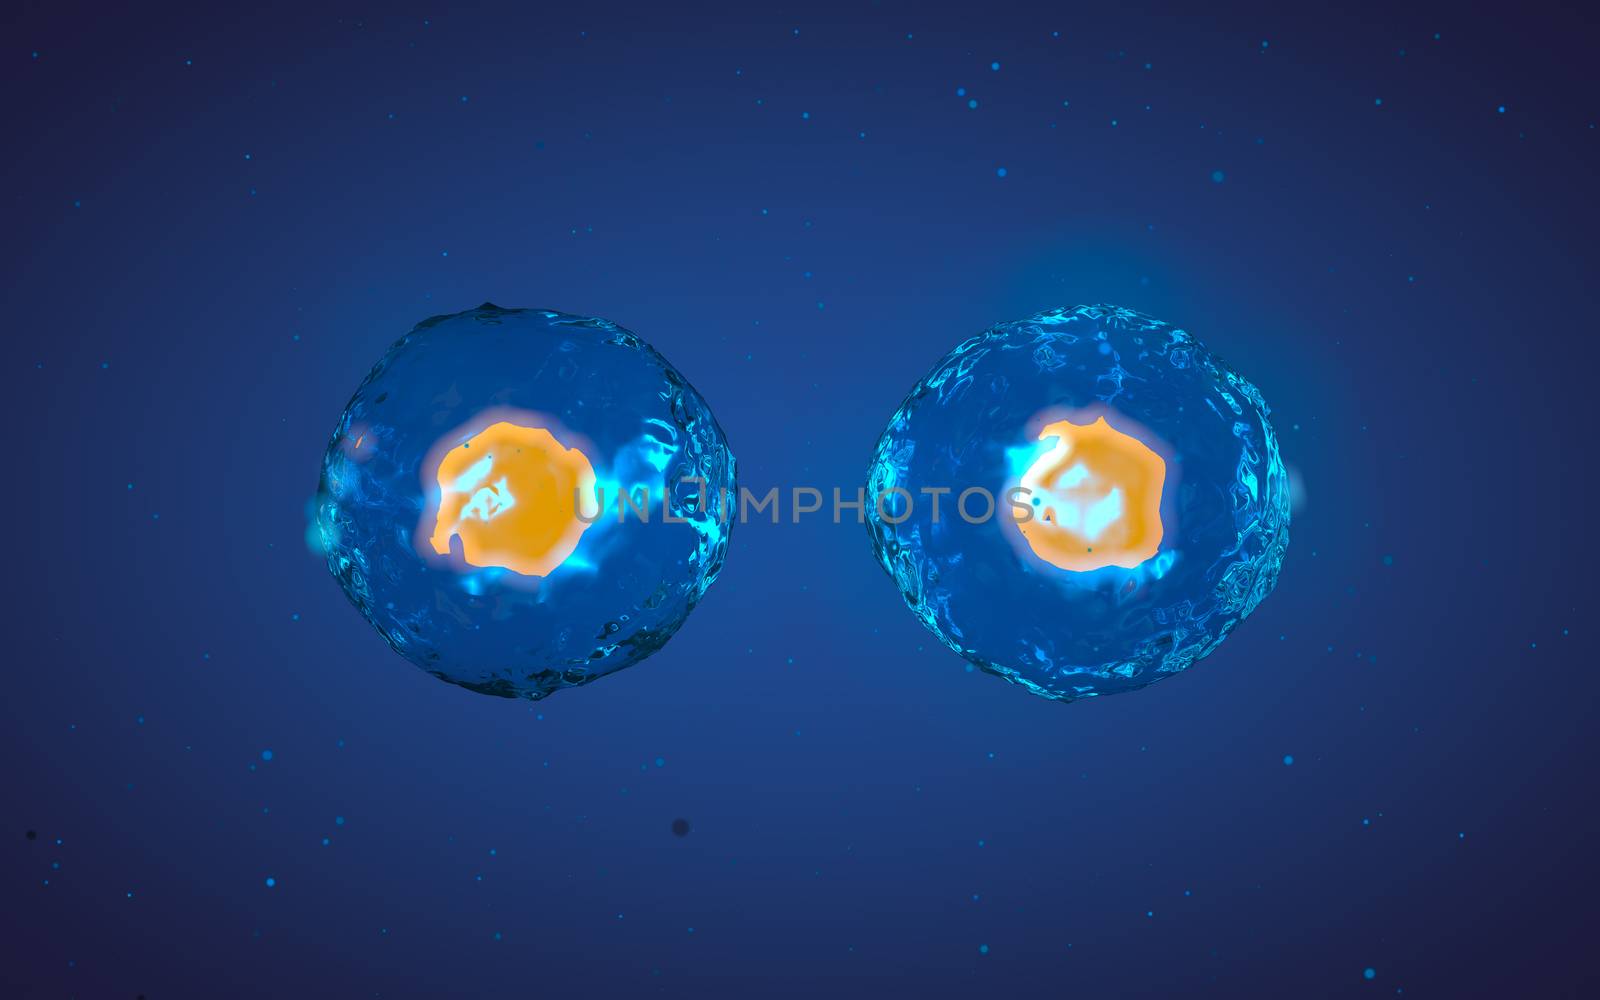 Abstract illustration of cell in mitosis or multiplication by clusterx